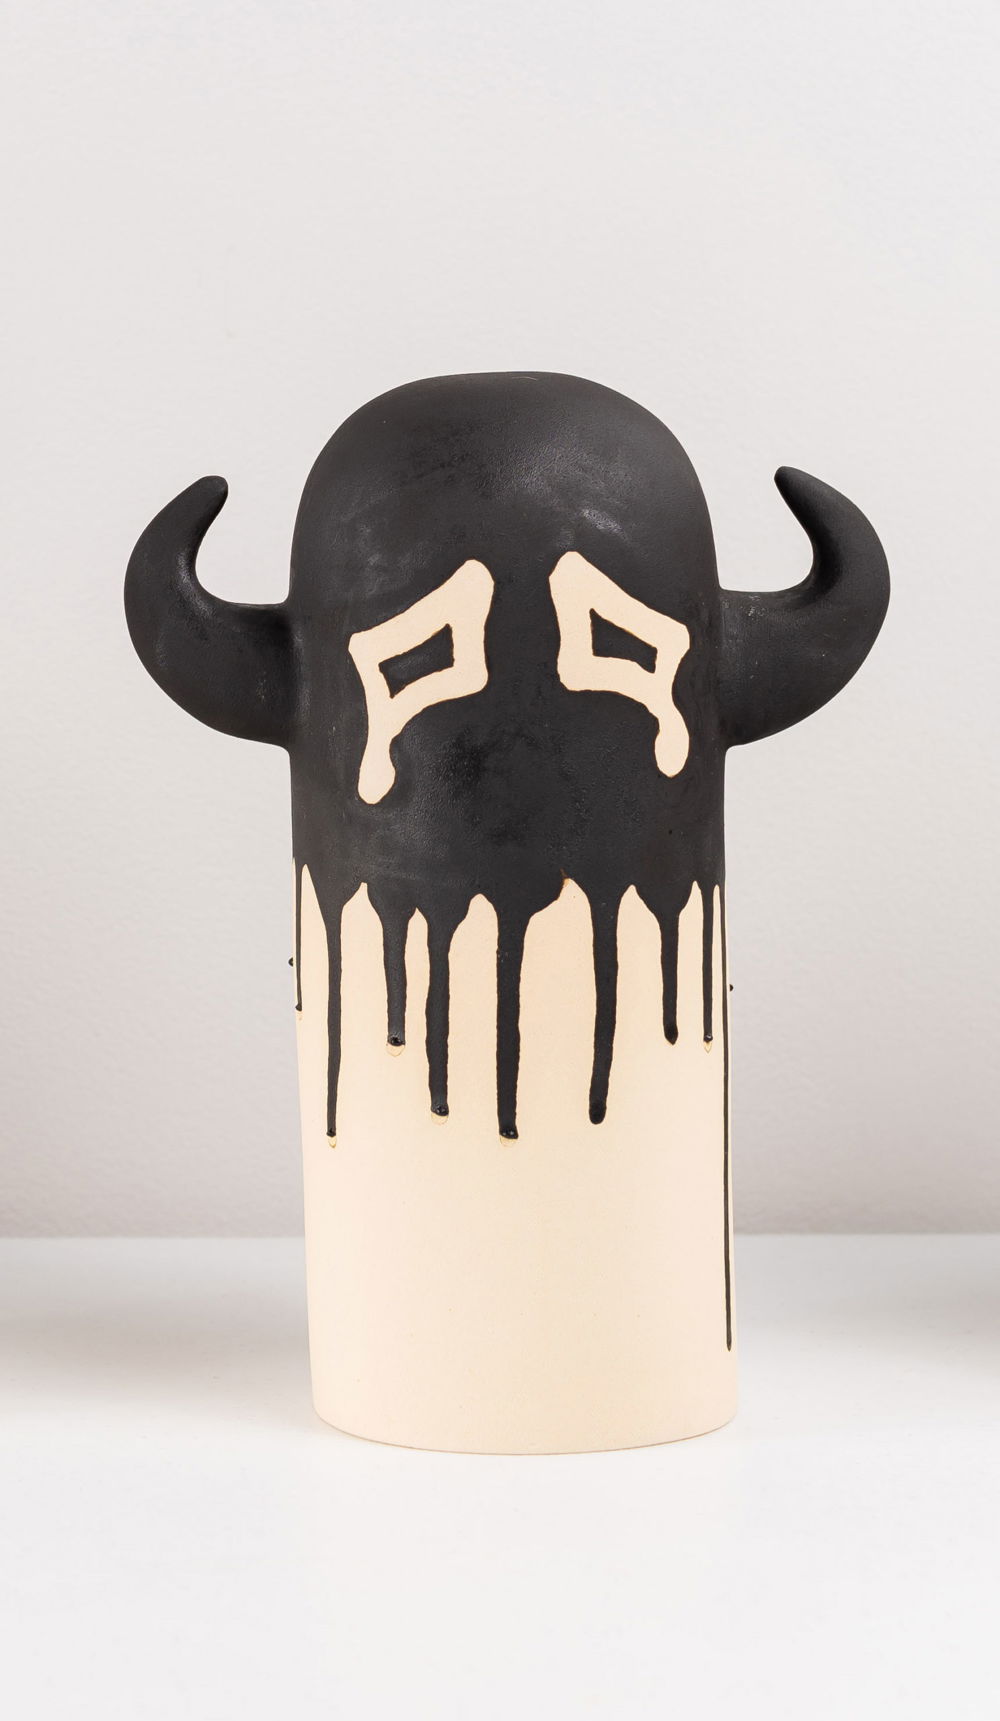 A cylinder shaped sculpture with a rounded top and two antlers protruding on either side. Black paint covers the top half of the otherwise white sculpture, with the exception of two white, cartoonish eyes which drip as though they are crying.